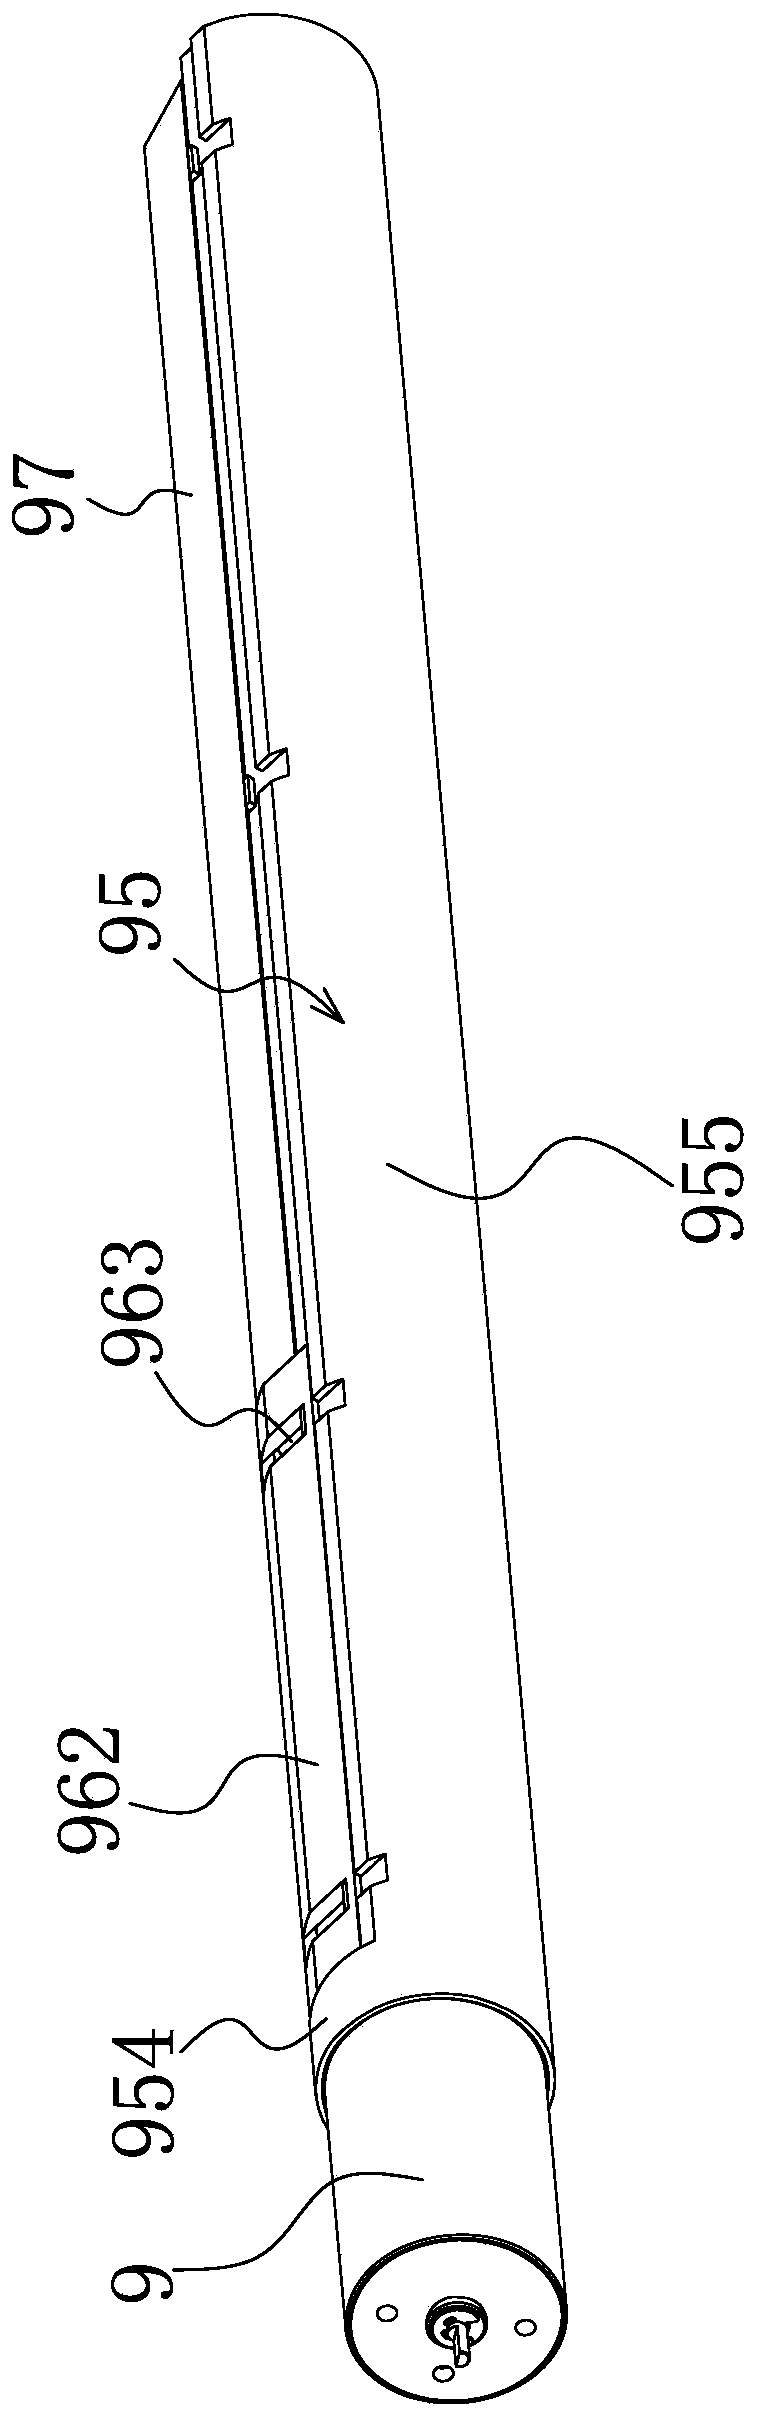 Tubular motor assembly with hollow cup motor structure